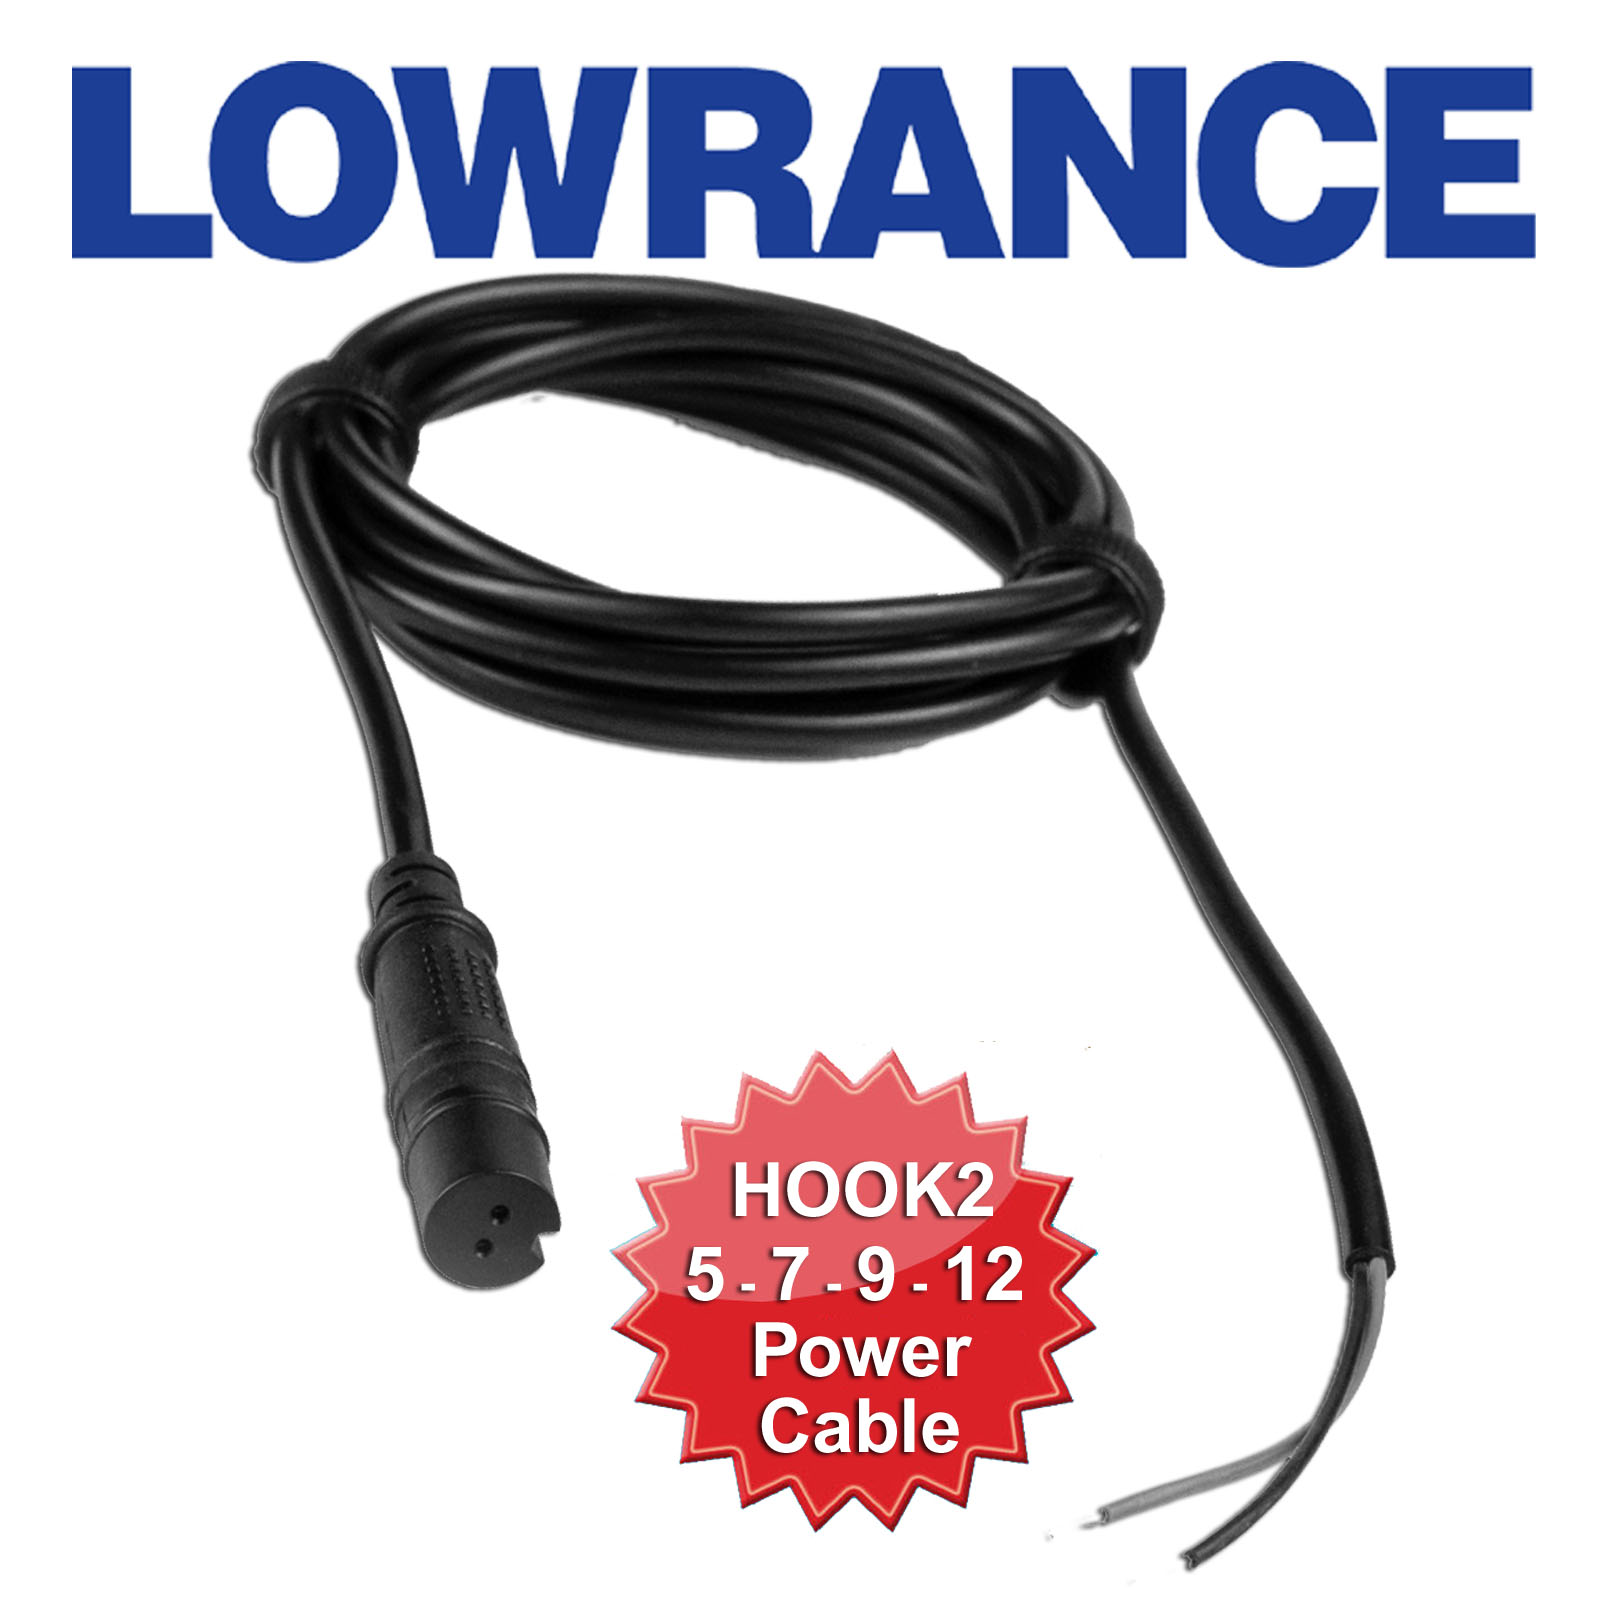 Lowrance HOOK² Power Cable - HOOK² / Reveal & Cruise Power Cable